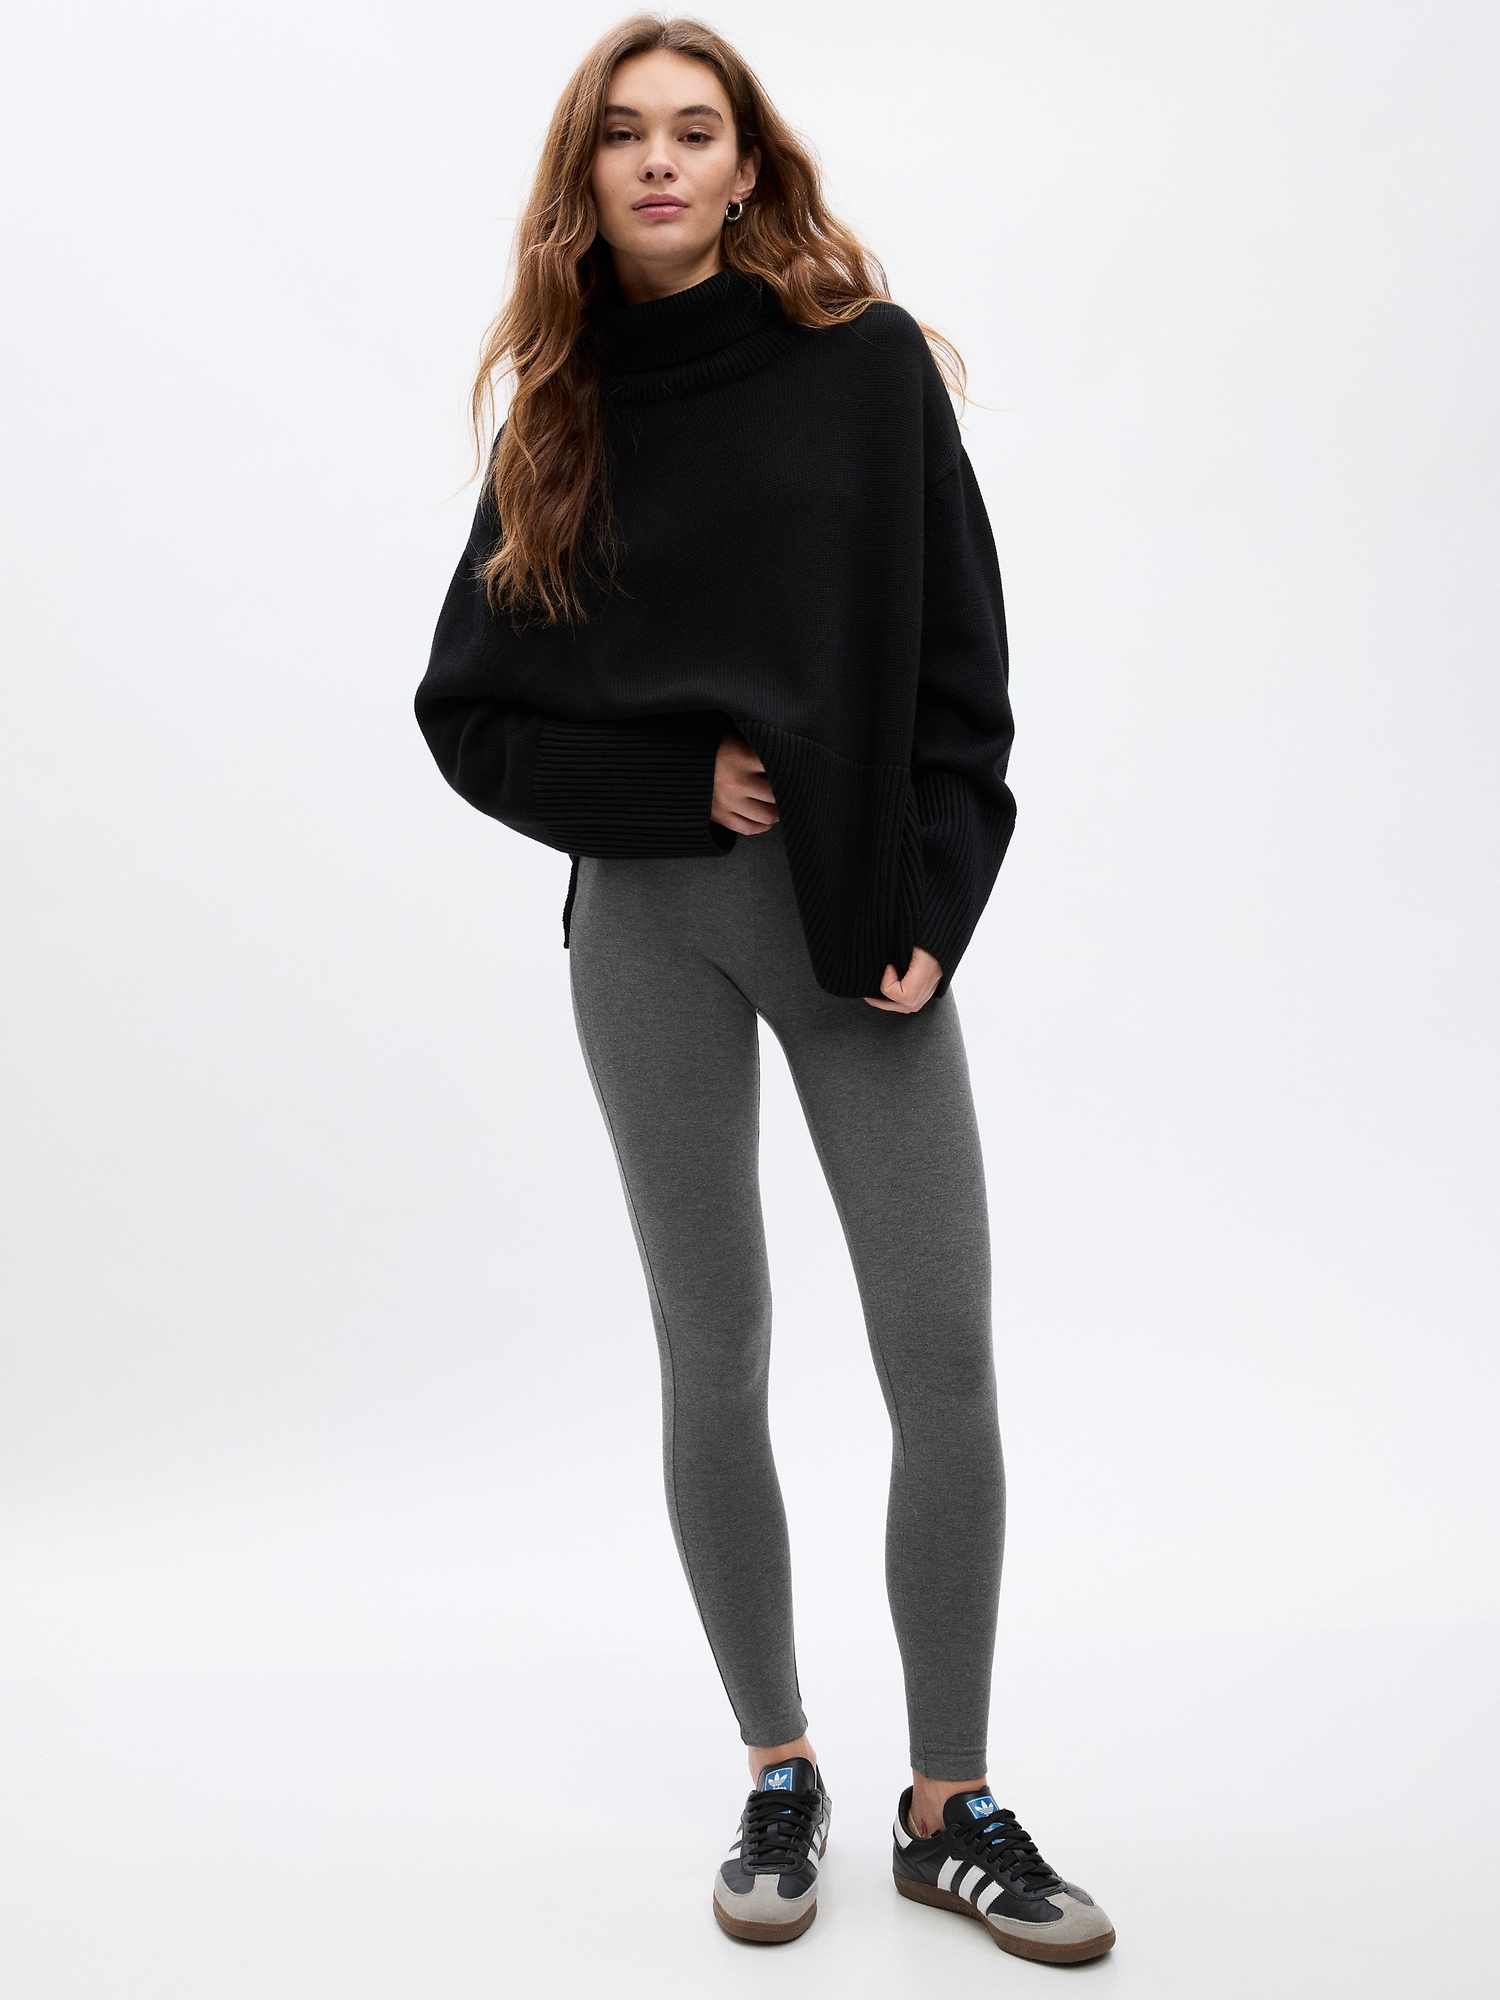 Stock Up on These 'Comfy and Convenient' Leggings from